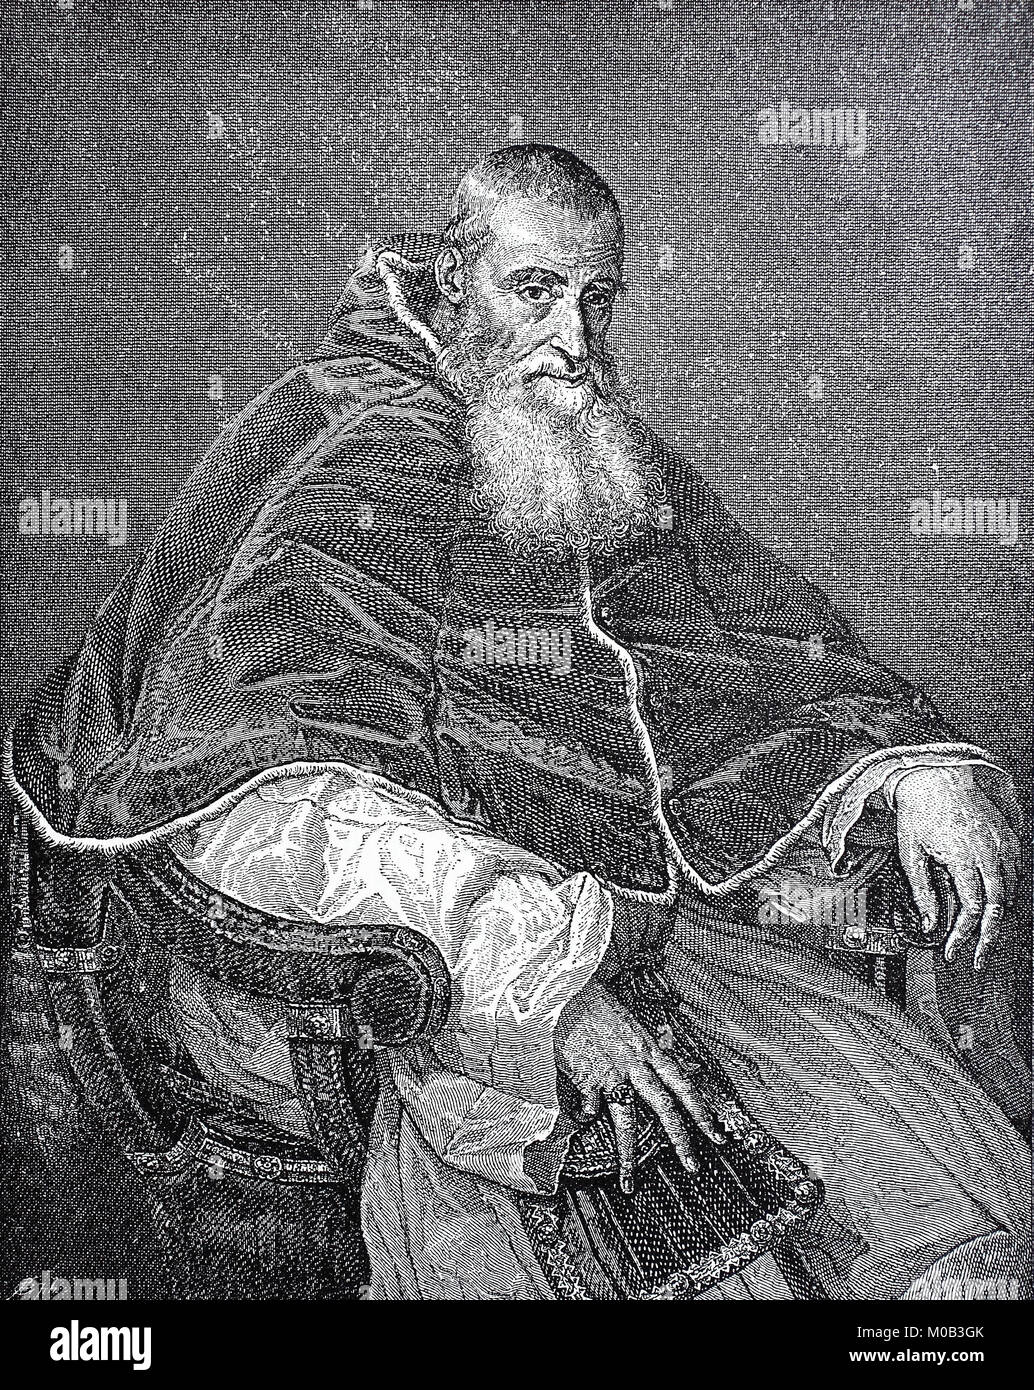 Paul III, born as Alessandro Farnese, February 29, 1468 - November 10, 1549, was pope of the Roman Catholic Church from October 13, 1534 until his death, digital improved reproduction of an original print from 1880 Stock Photo